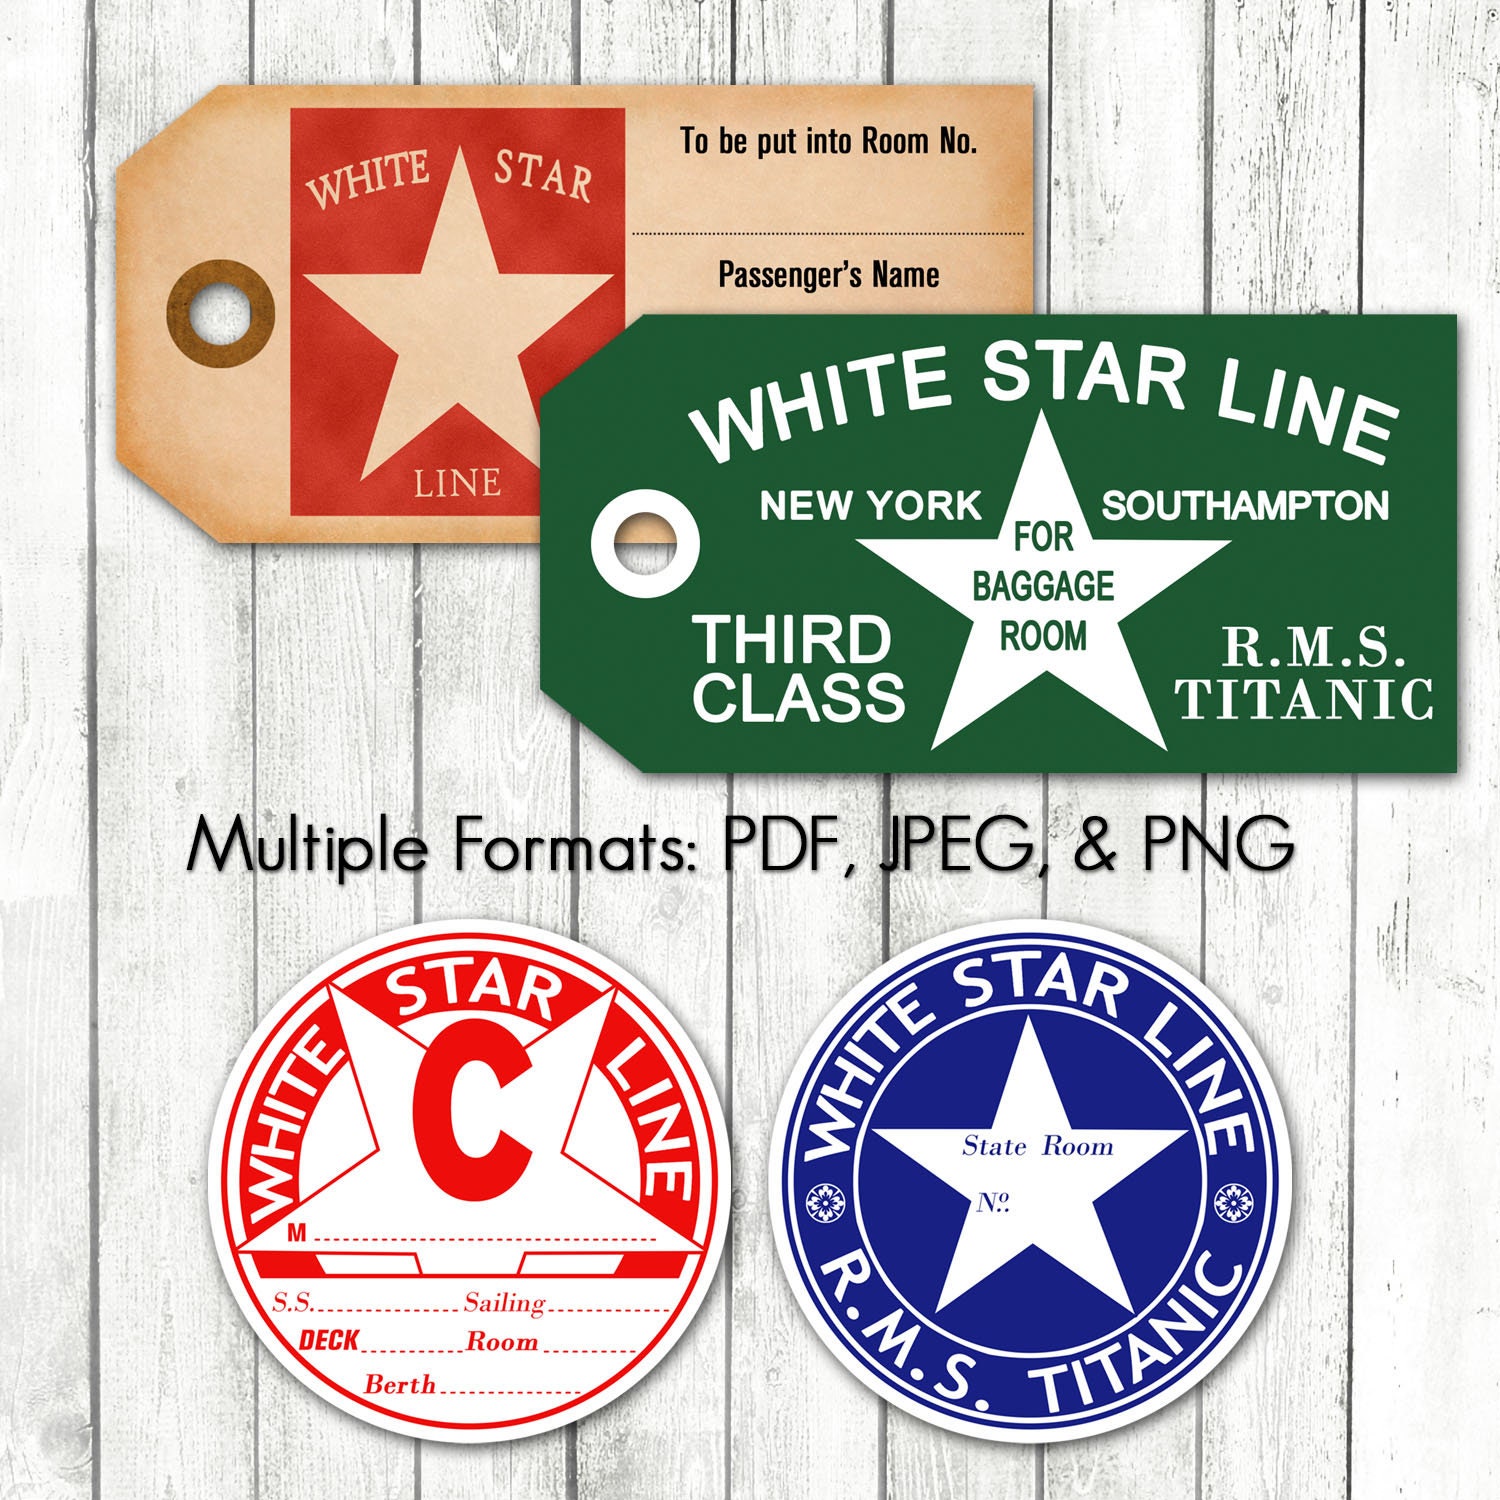 White Star Line Titanic First Class Luggage Tags!! Rare Circa 1912 Style  Tags!!